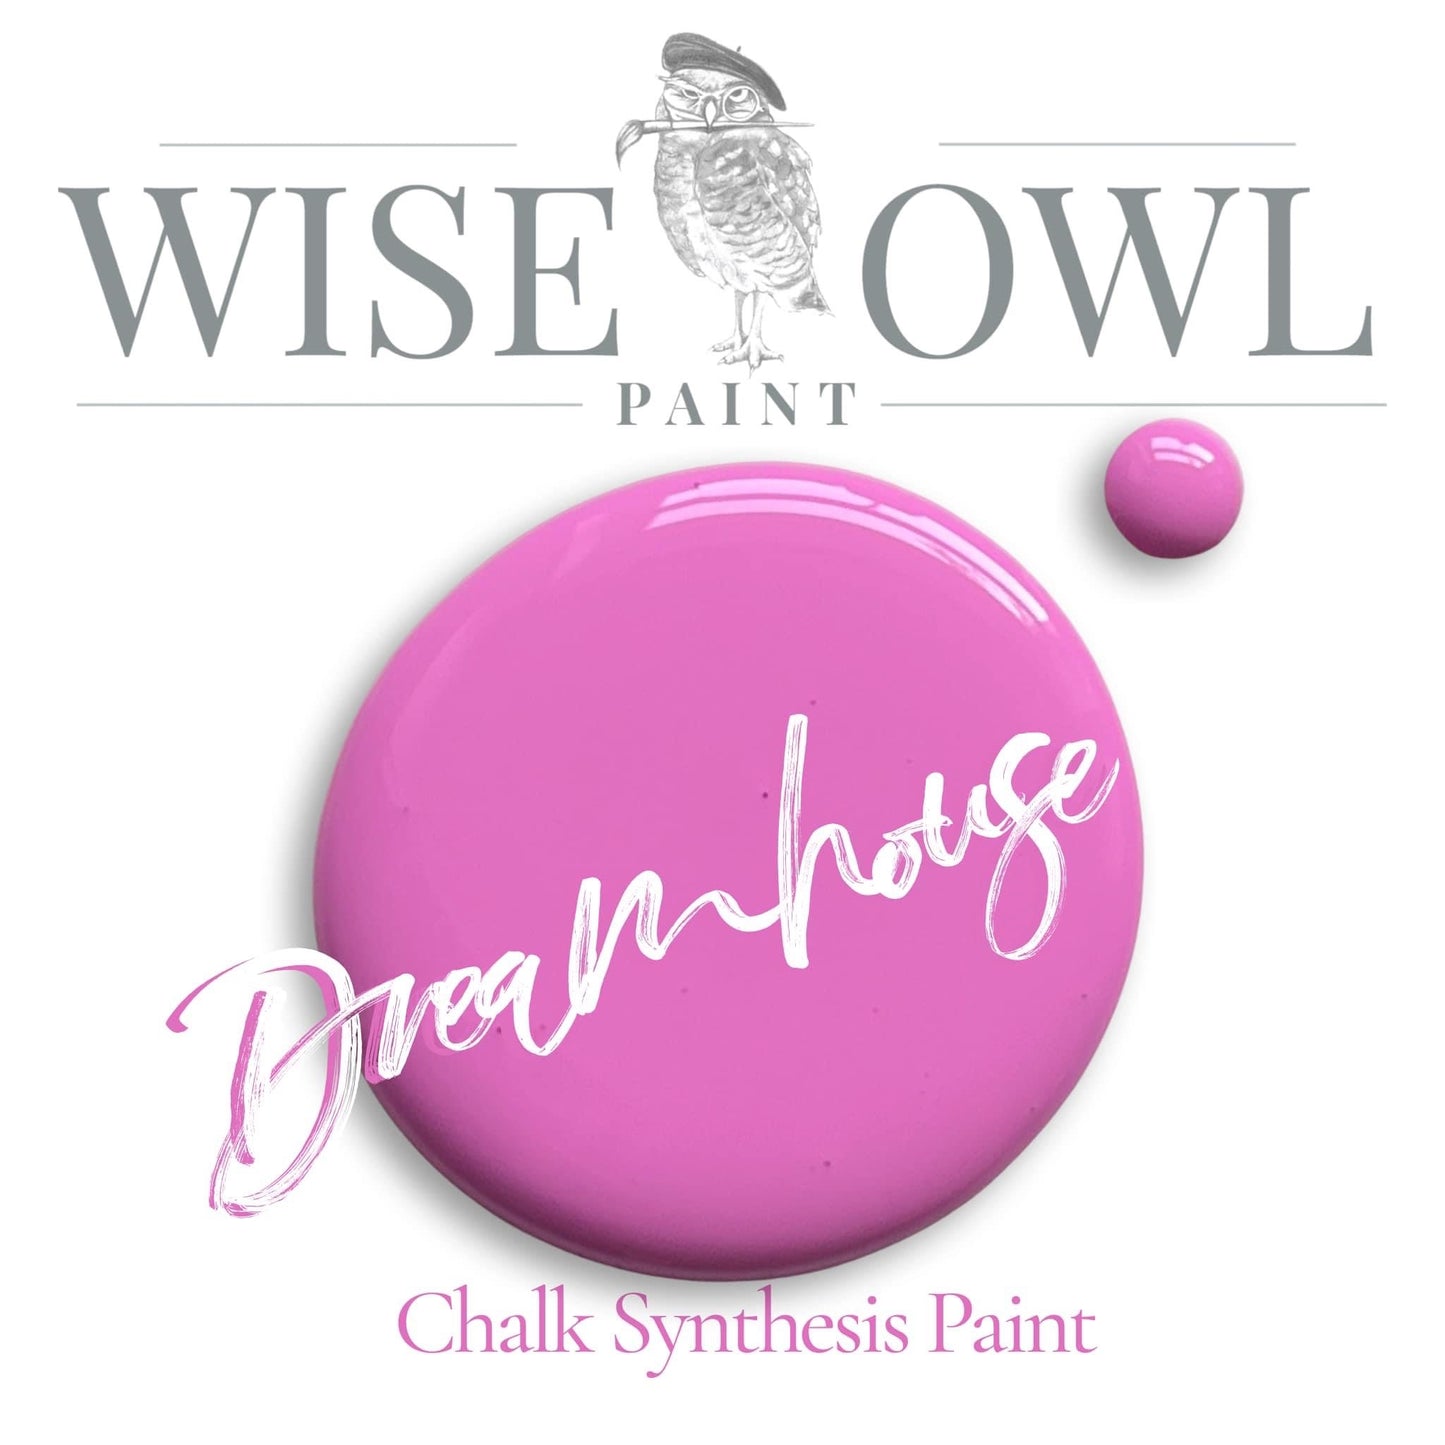 Wise Owl Chalk Synthesis Paint - Dream House